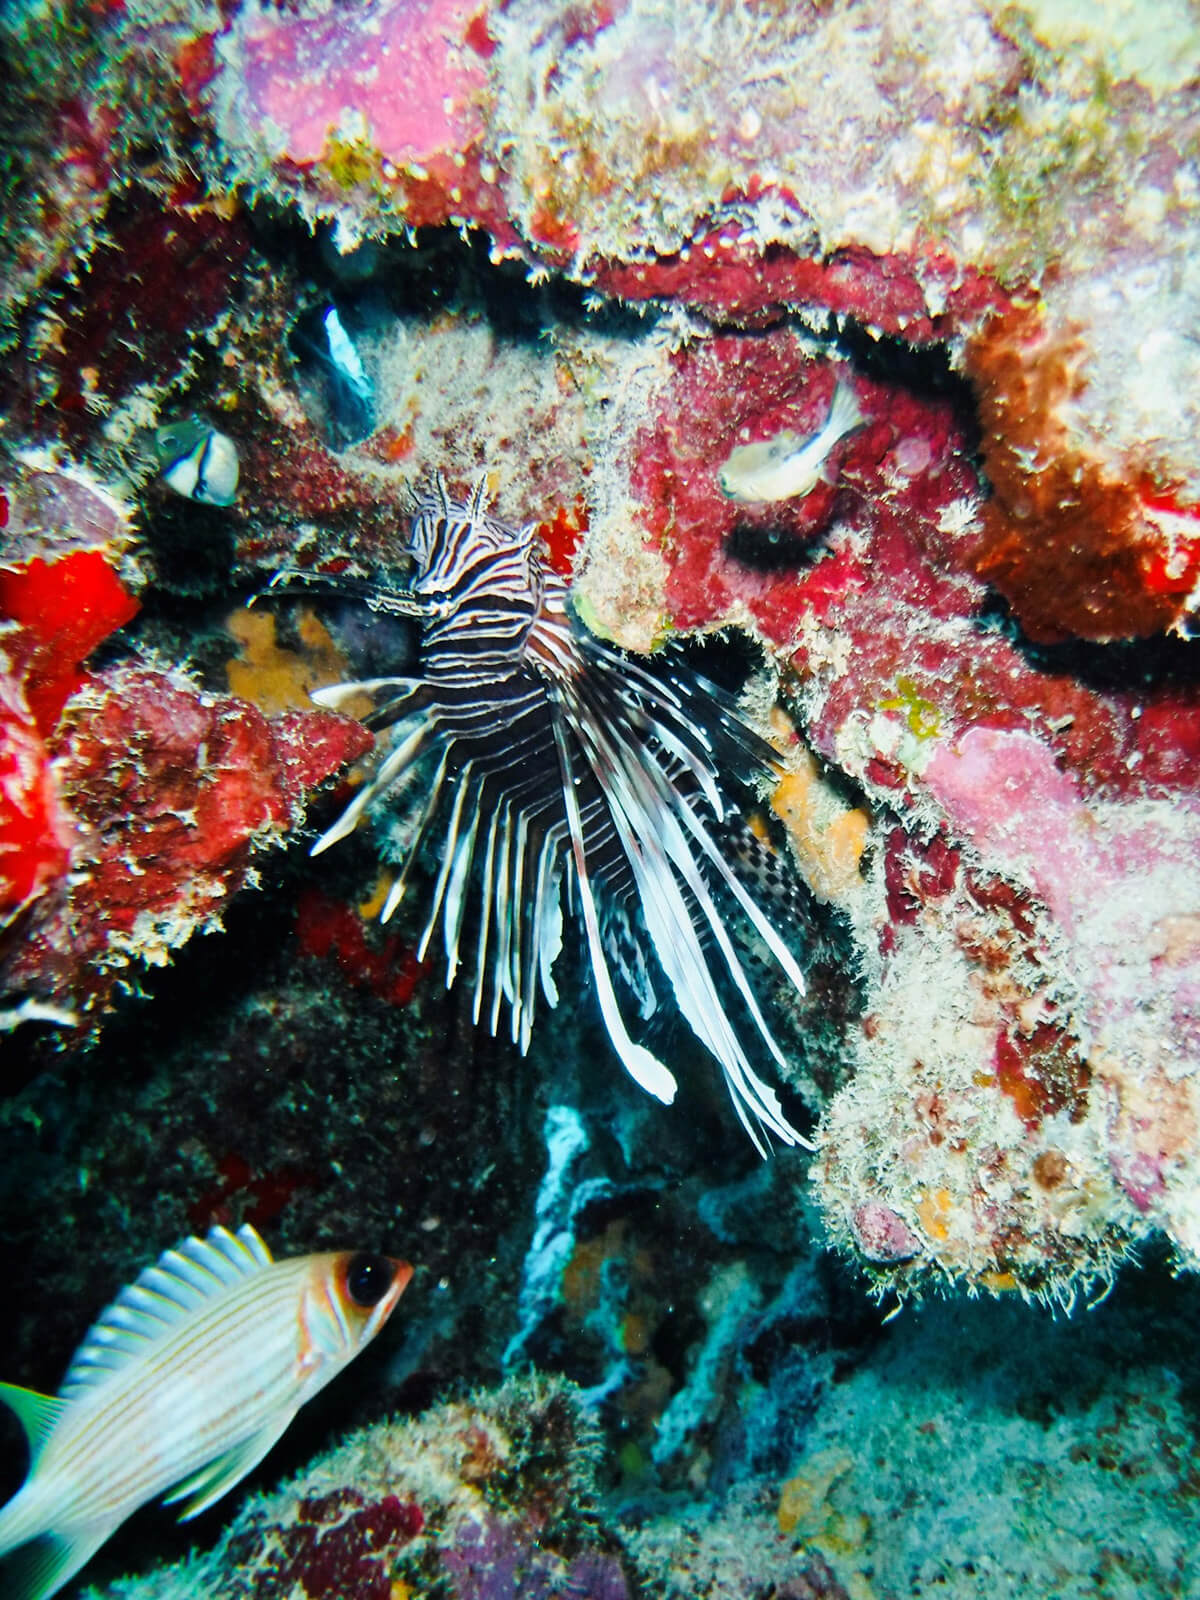 lionfish on the reef